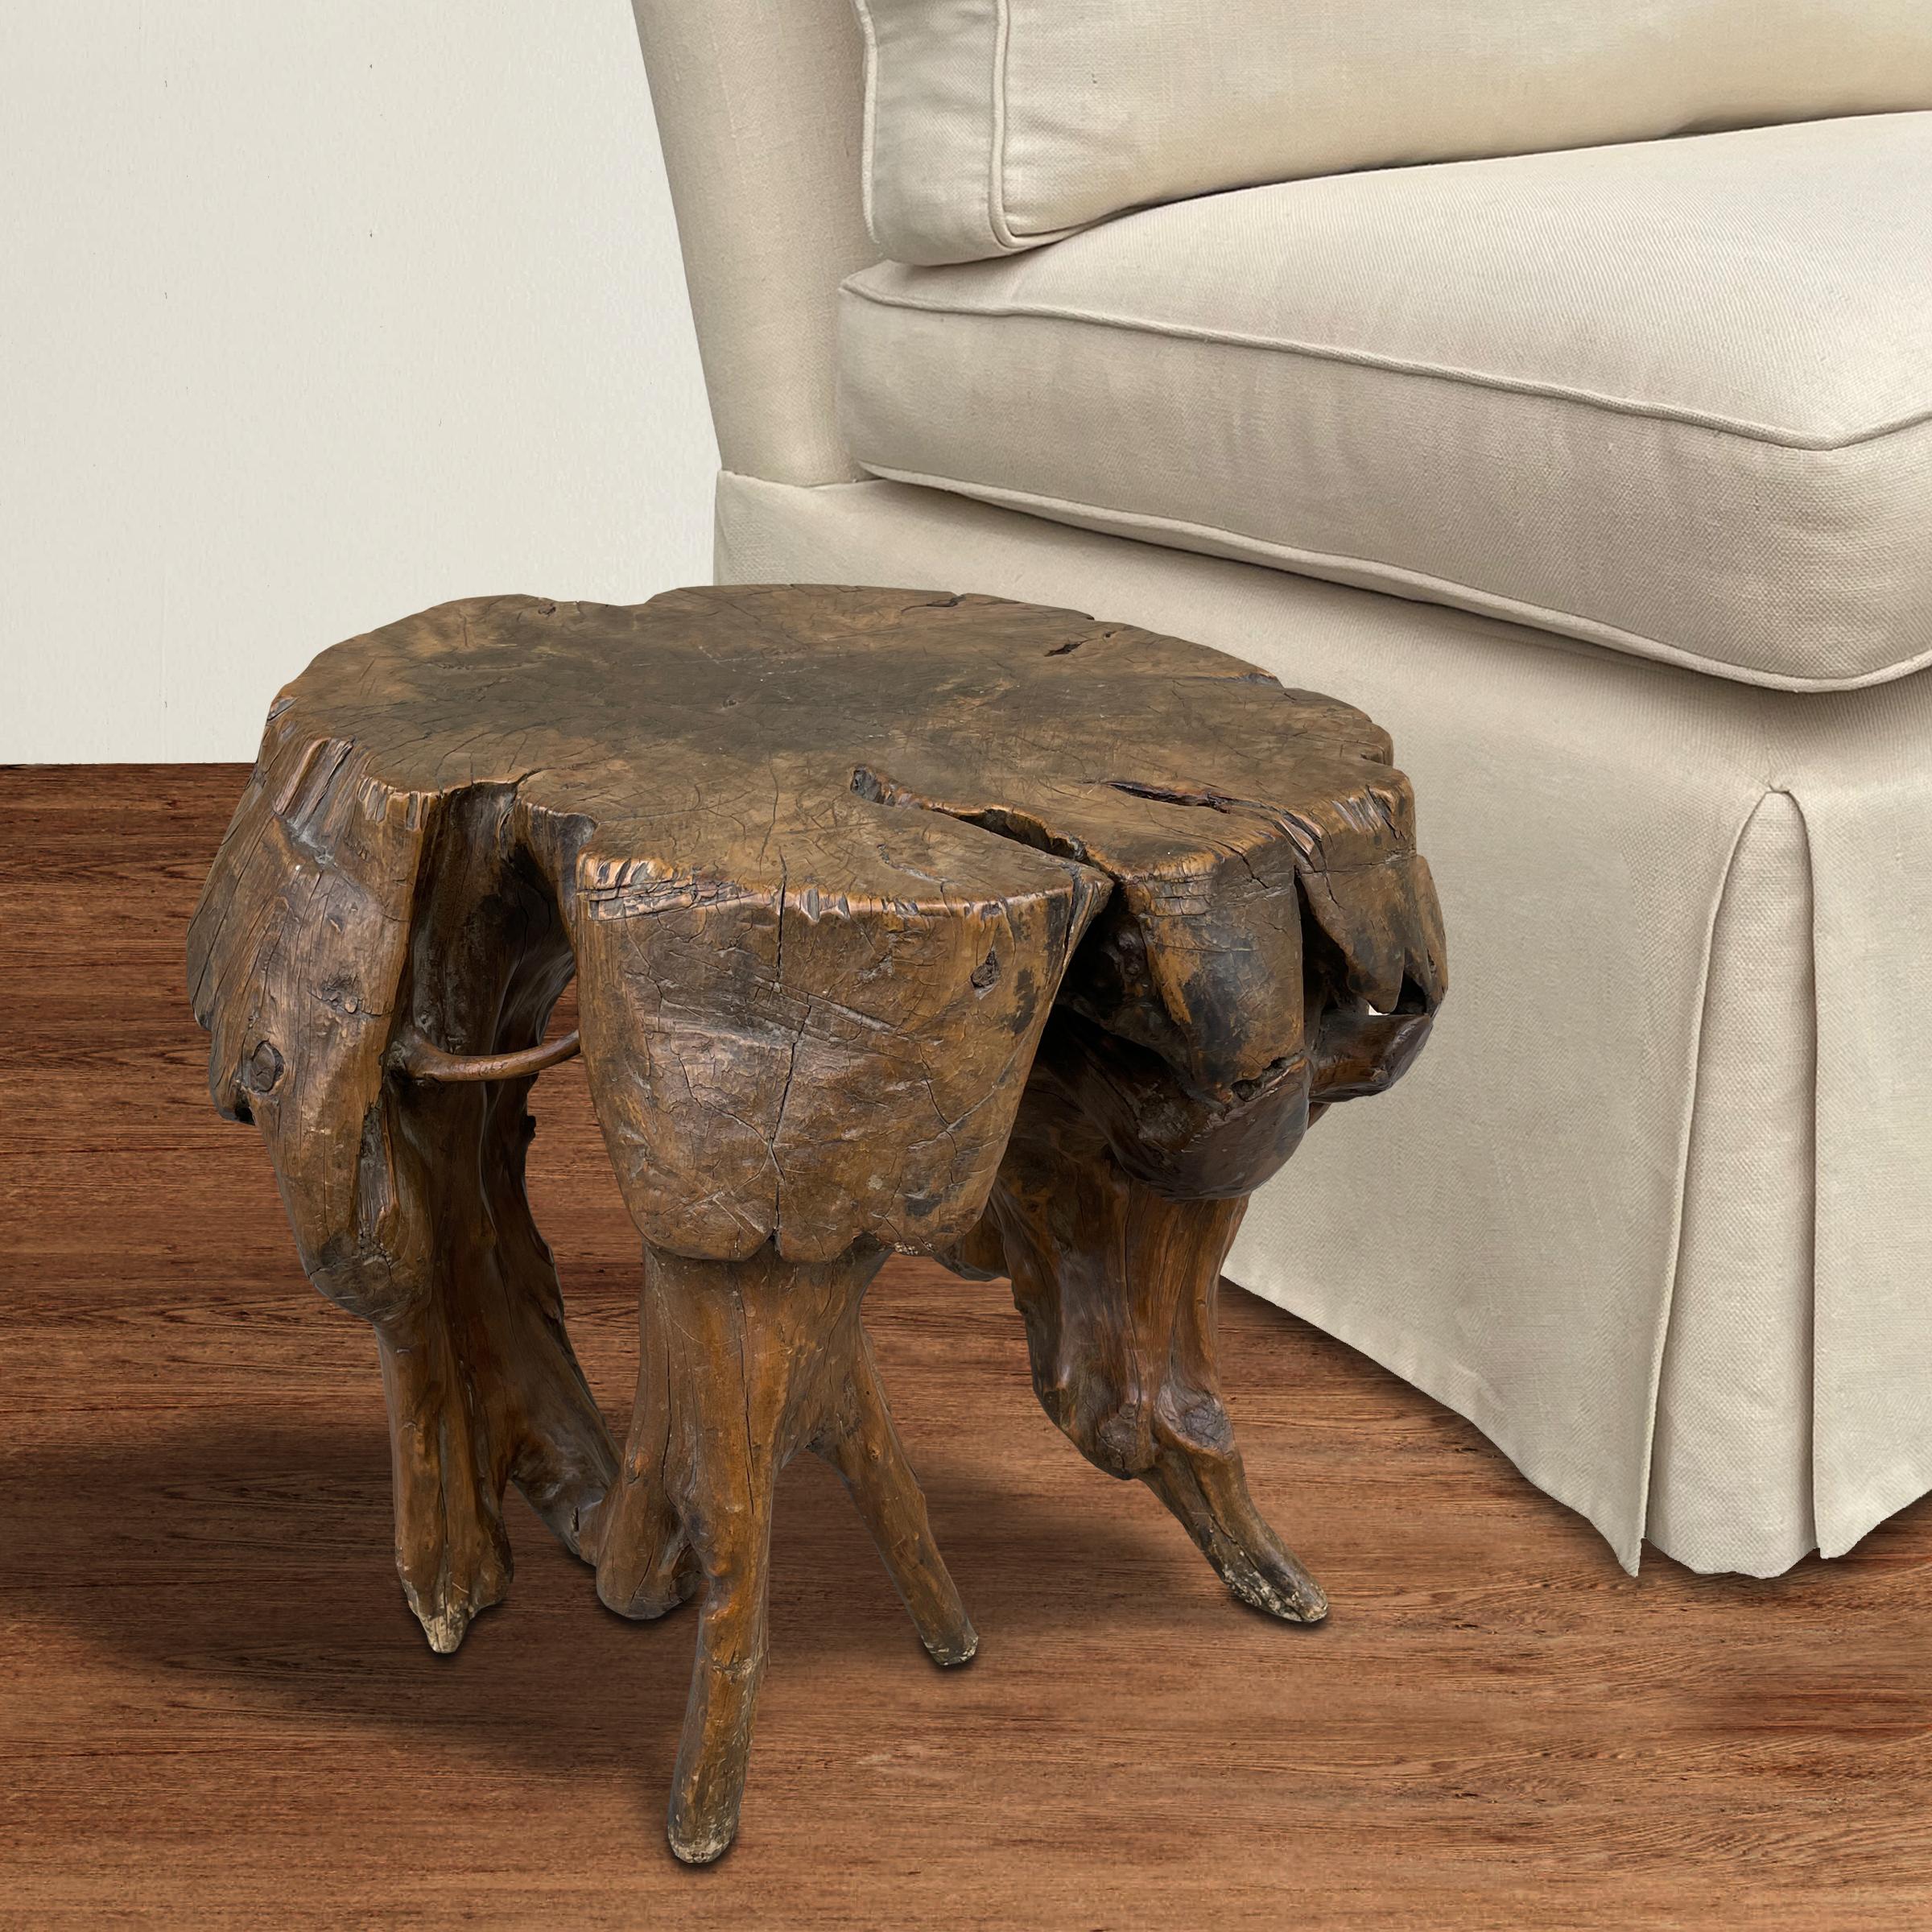 An incredible 18th/19th century Chinese Qing Dynasty Scholar's rootwood stool of wabi-sabi form with naturally formed legs, and a patina only hundreds of years can bestow. Stool also functions as a side table or drinks table next to your favorite